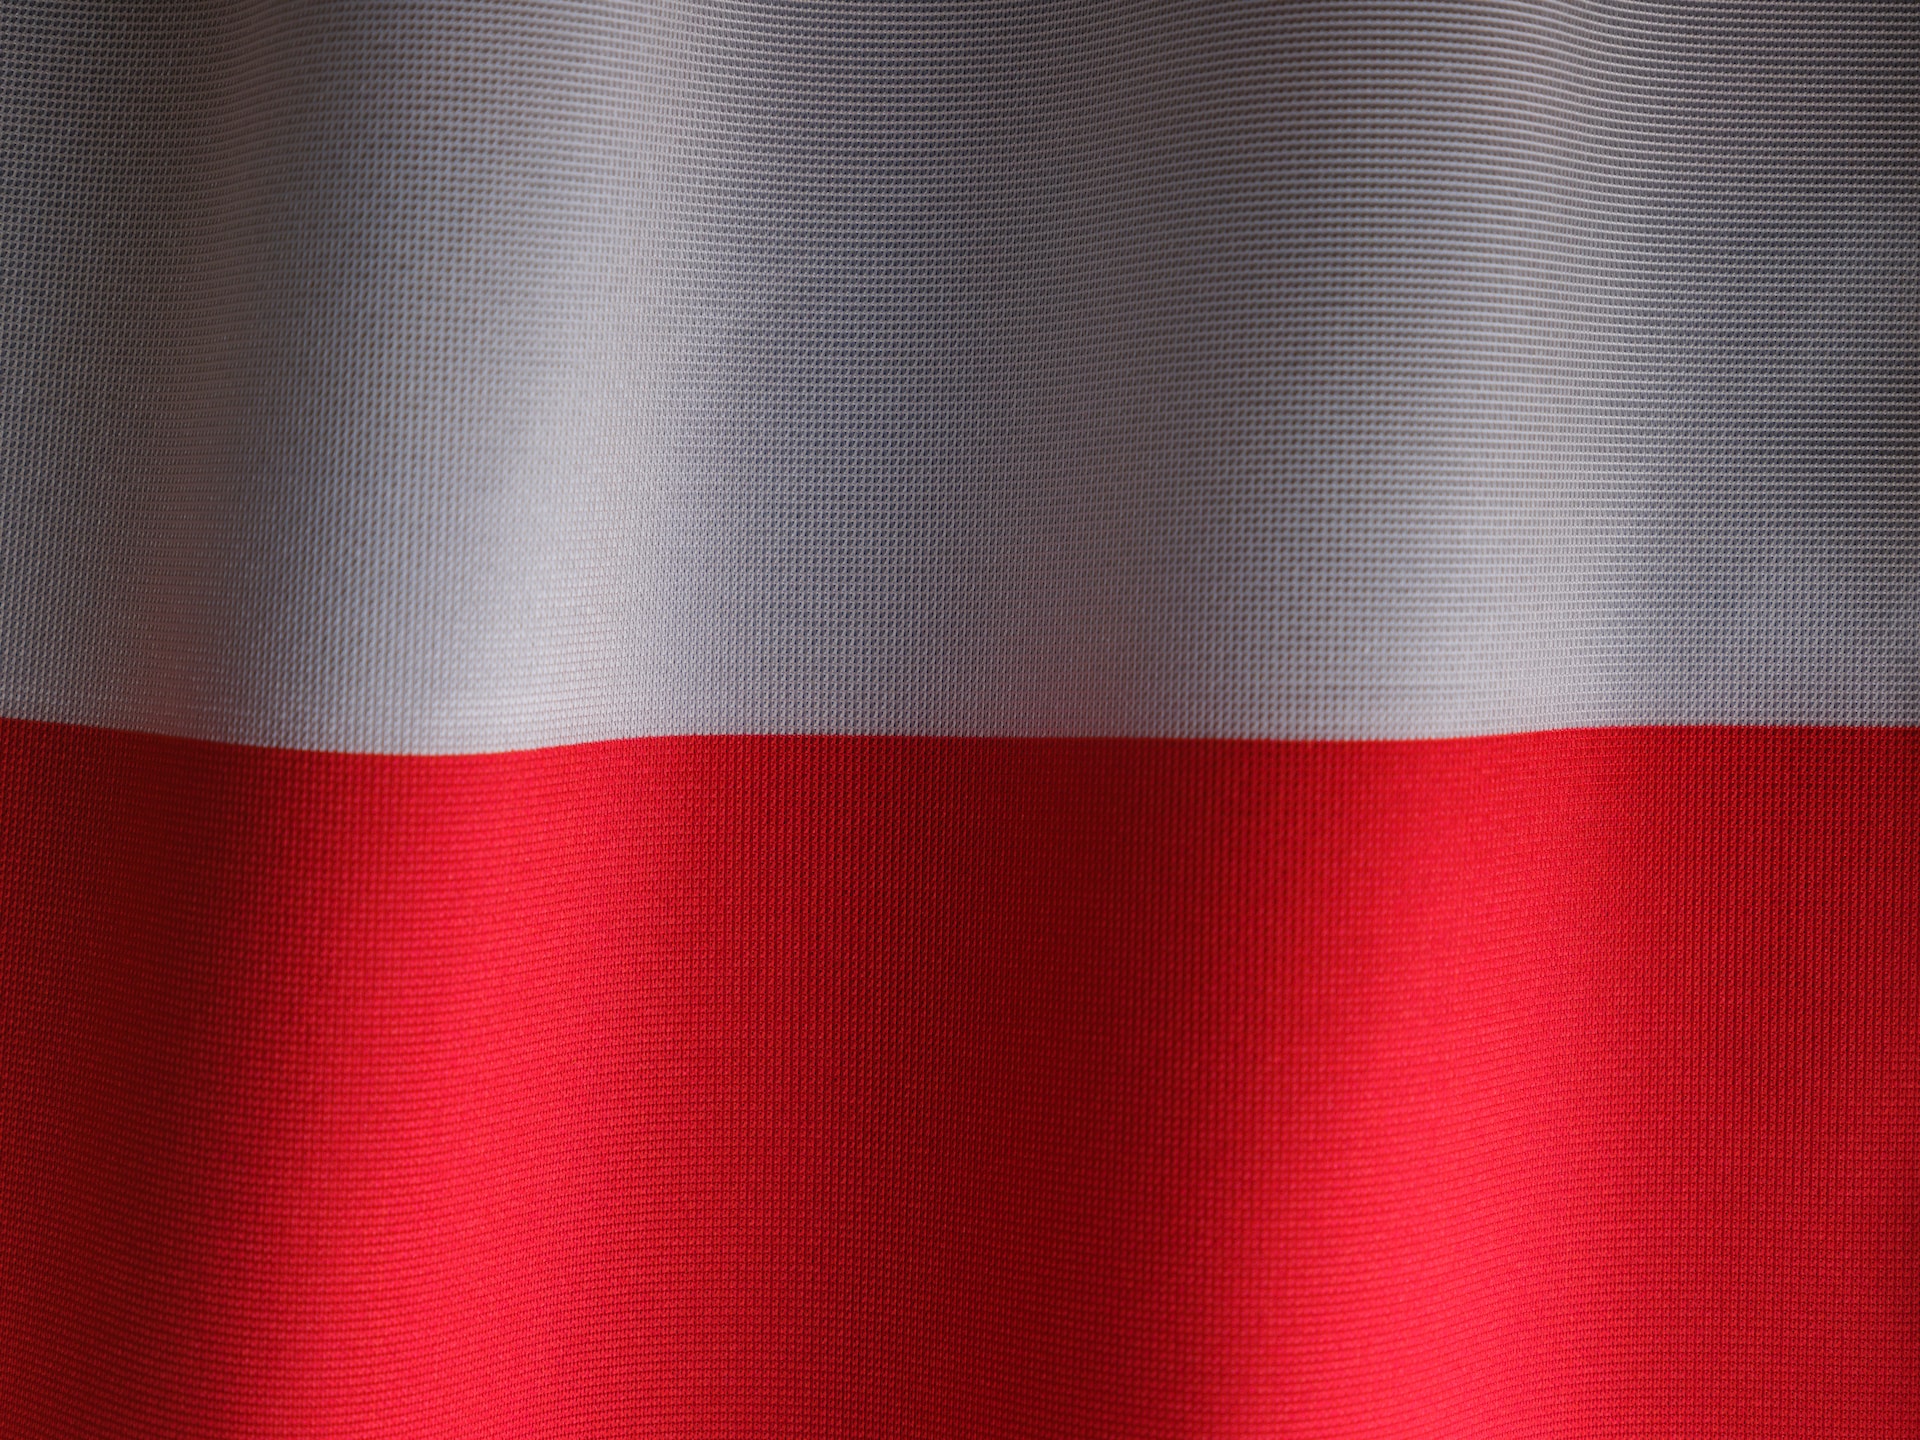 An Overview of the Poland eCommerce Sector